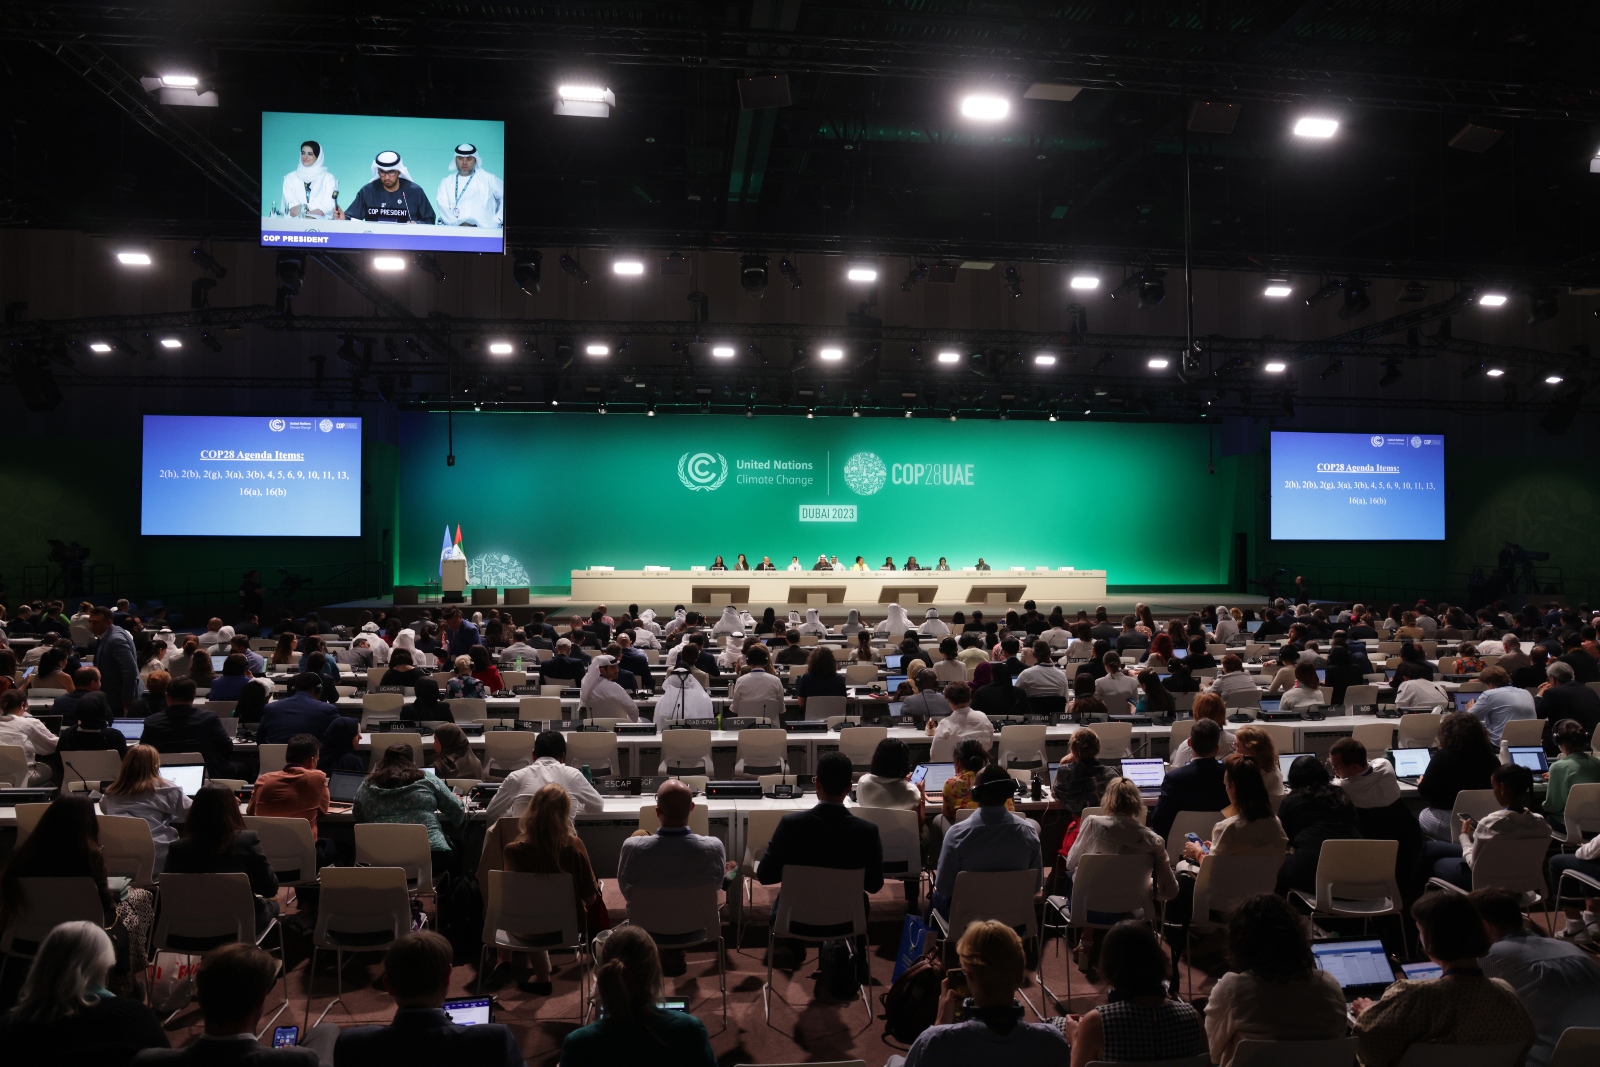 Sultan Ahmed Al Jaber, the president of the COP28 climate conference, speaks a plenary session on December 11. The conference has entered its final phase with key issues such as adaptation still unresolved.